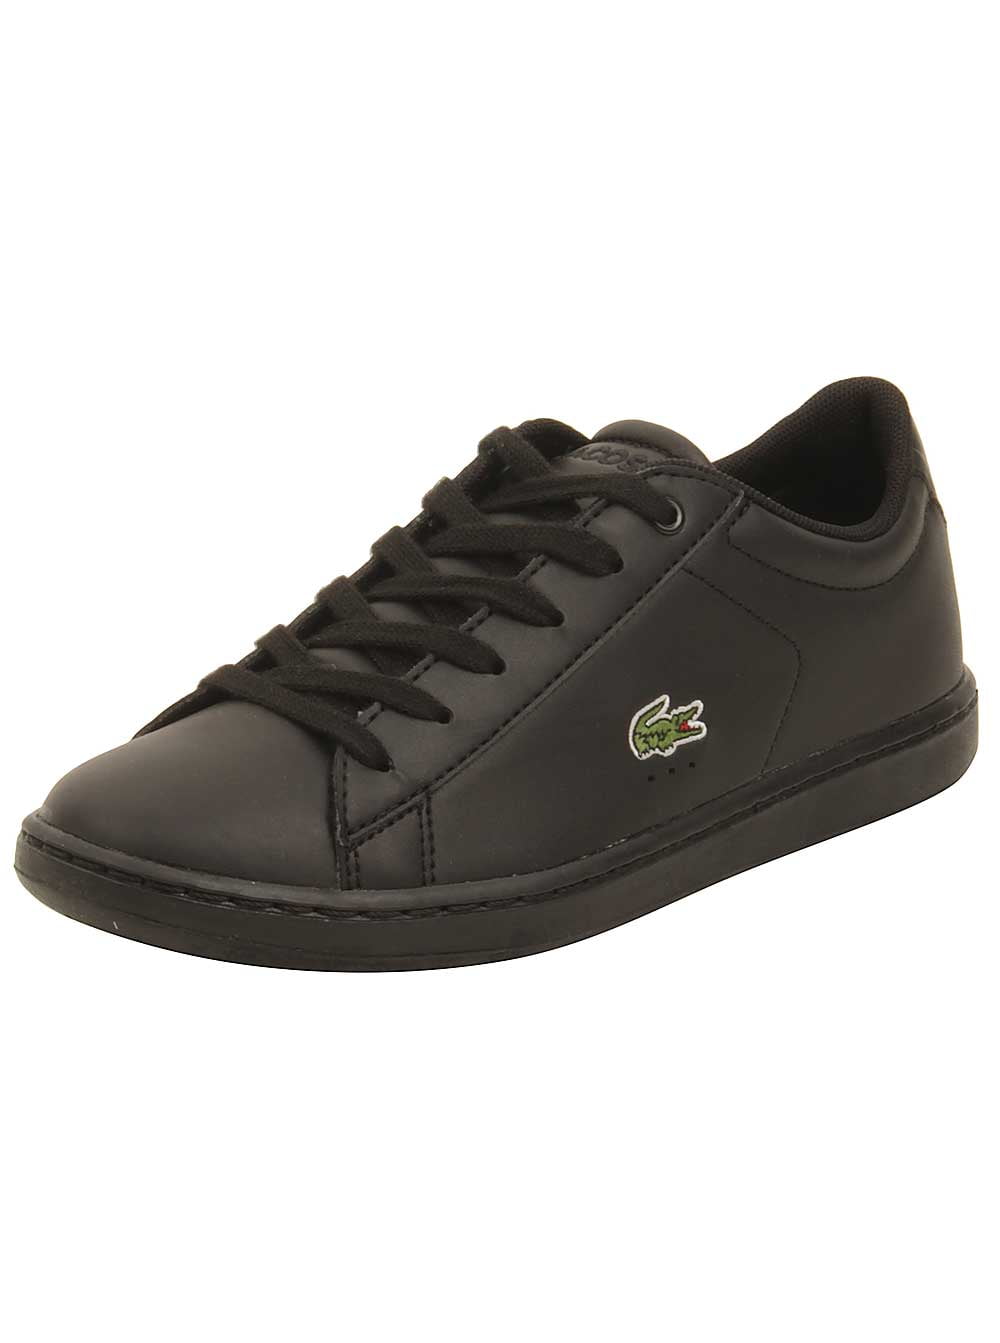 Lacoste Toddler Carnaby EVO 118 4 